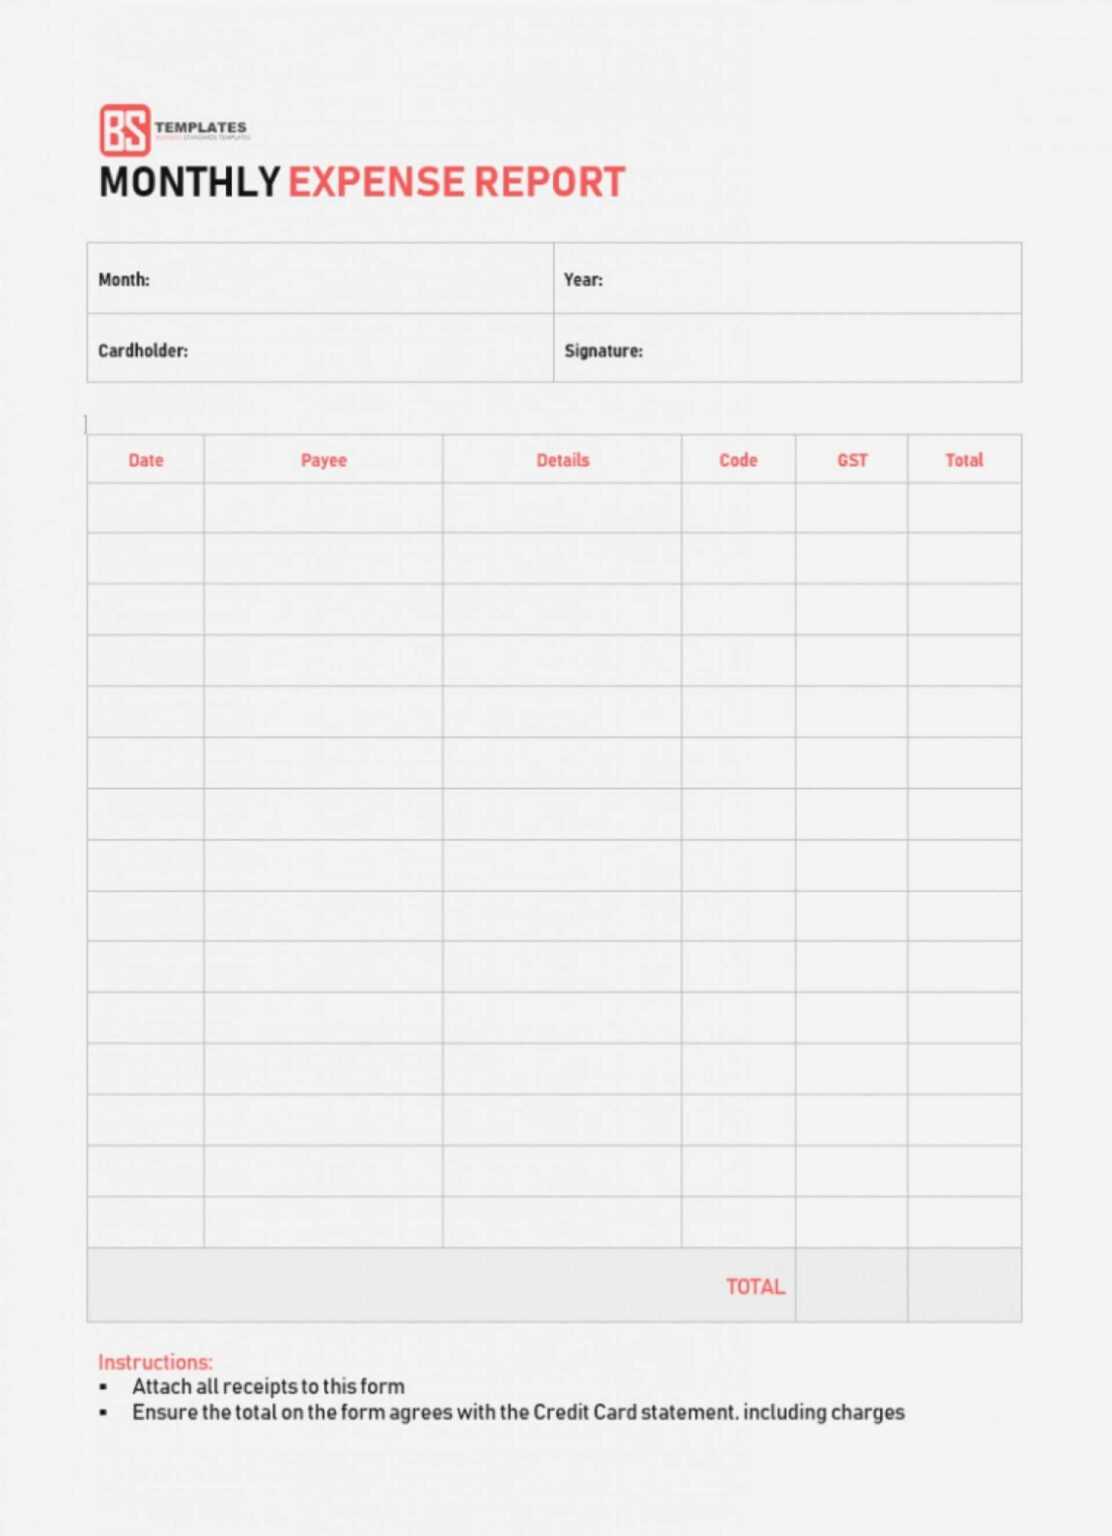 expense report template libre office